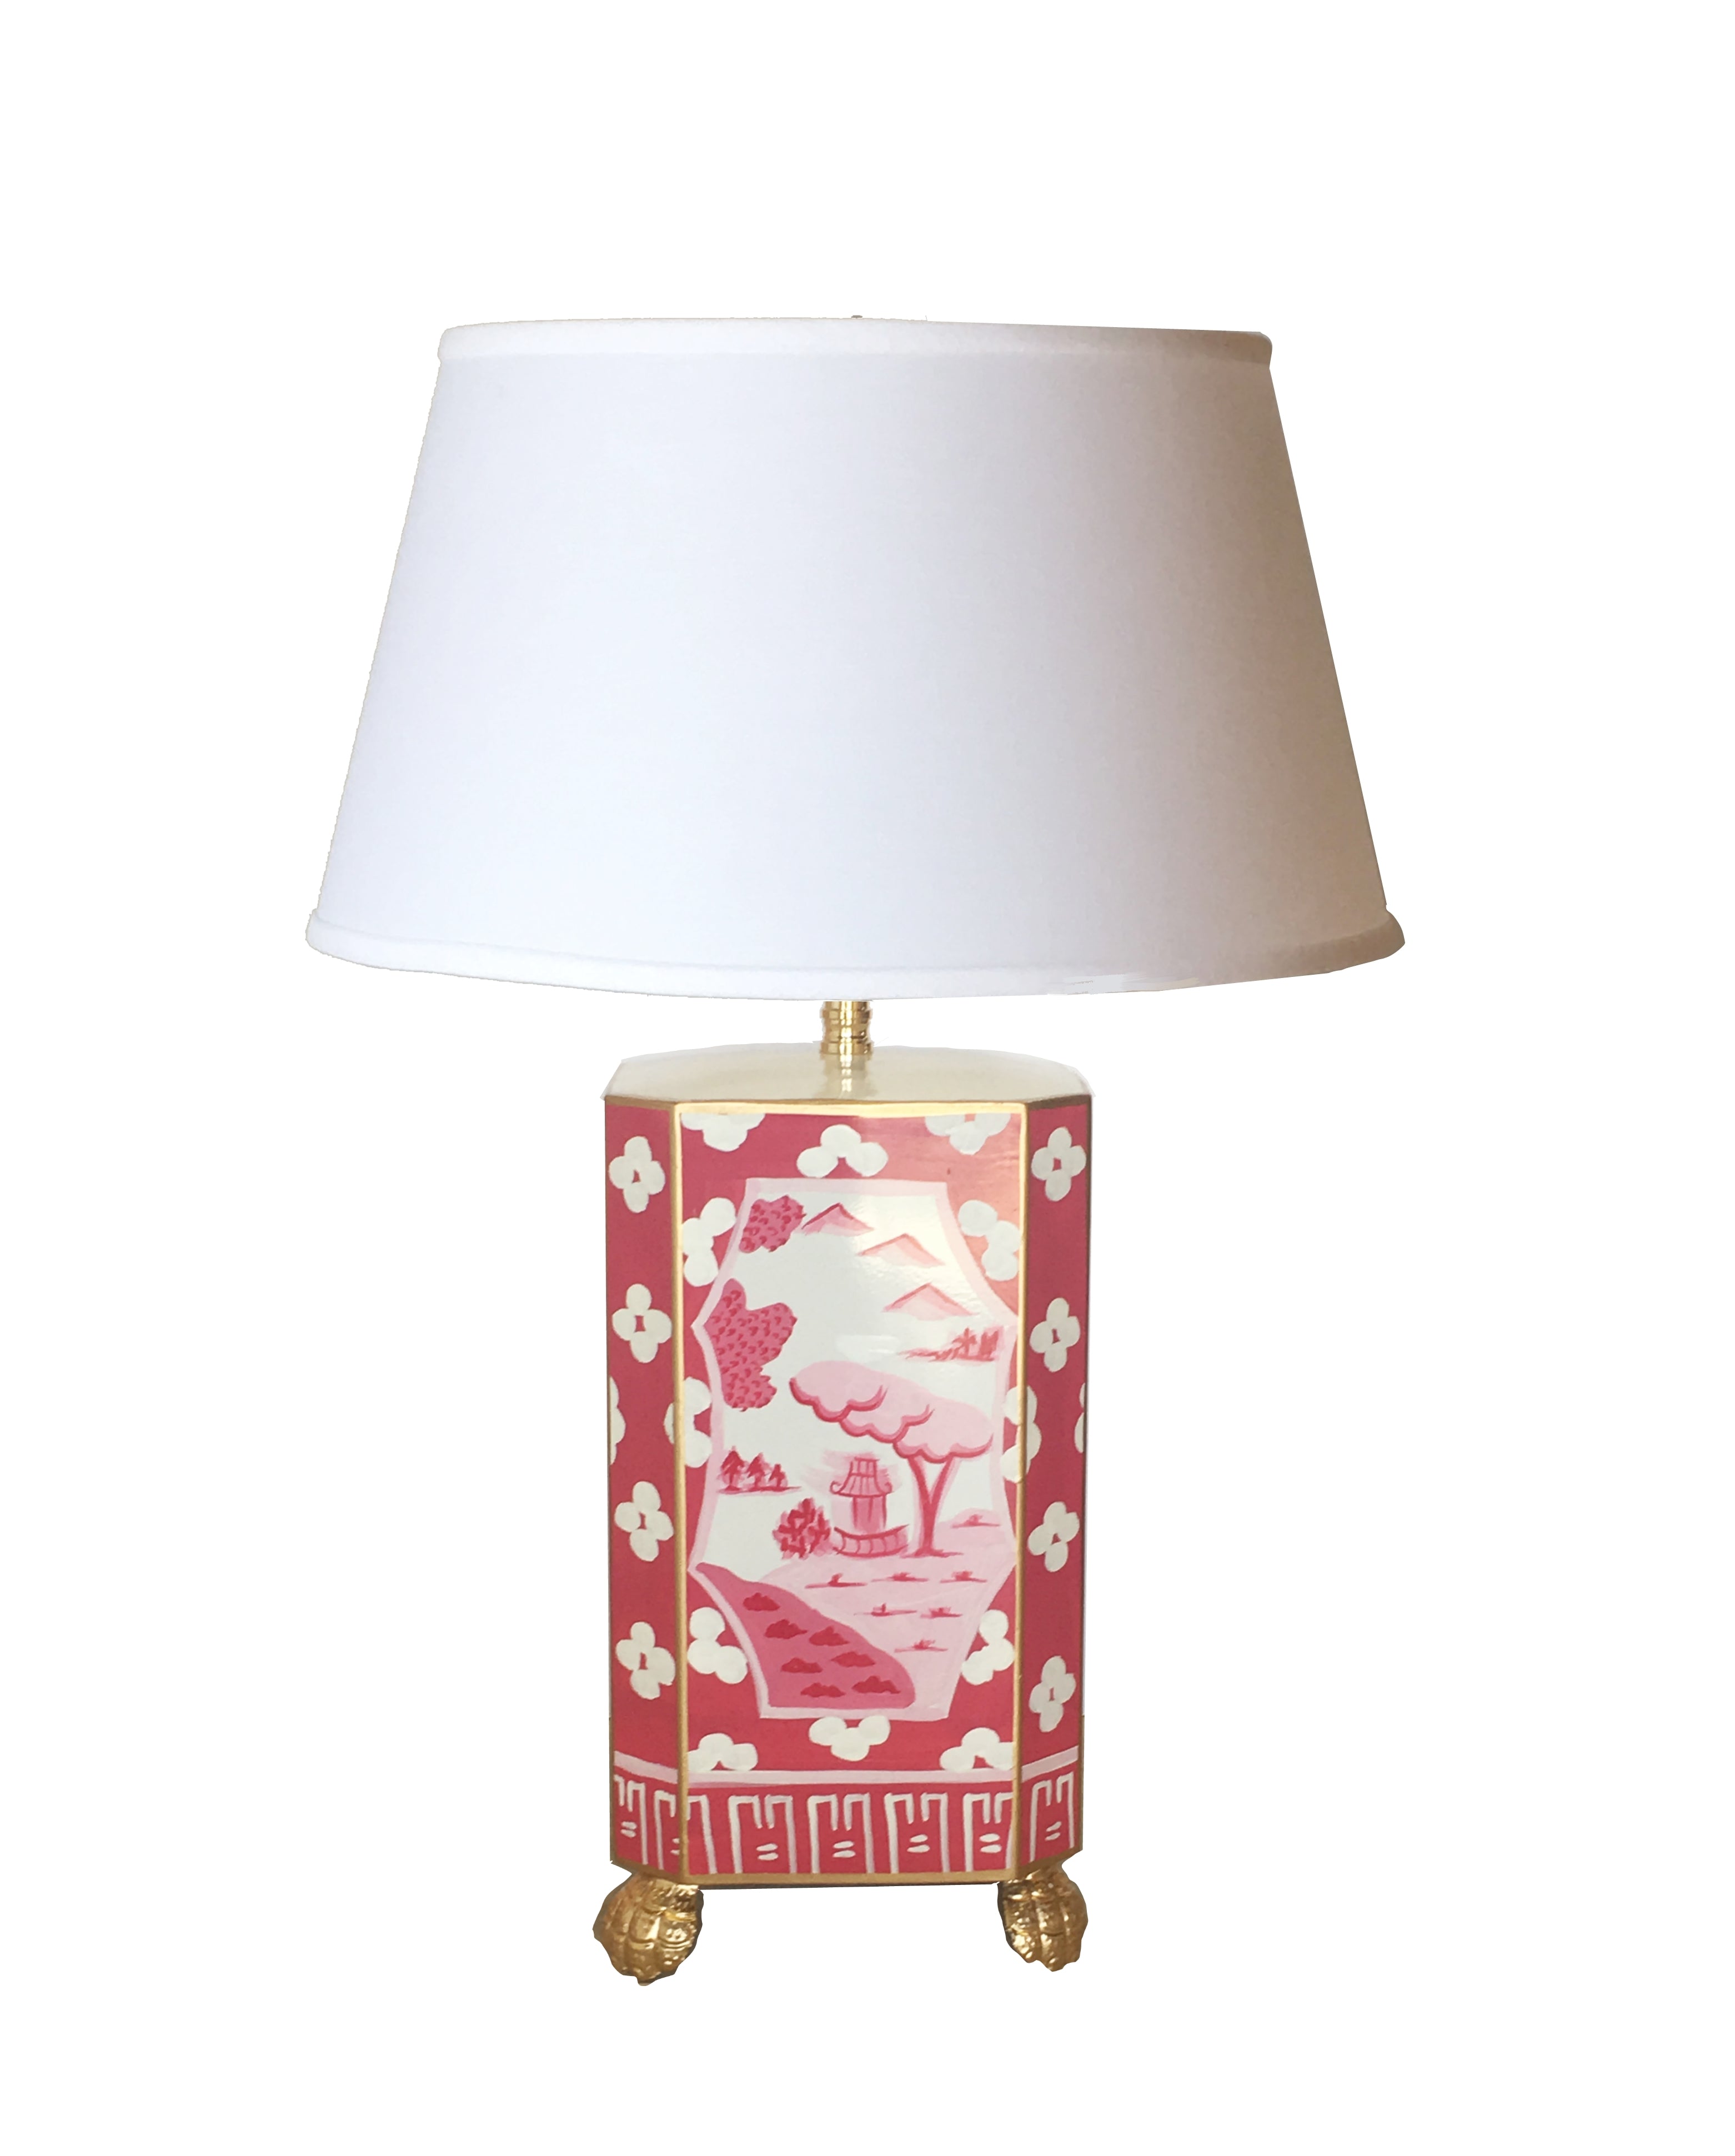 Dana Gibson Canton in Pink Lamp with White Shade